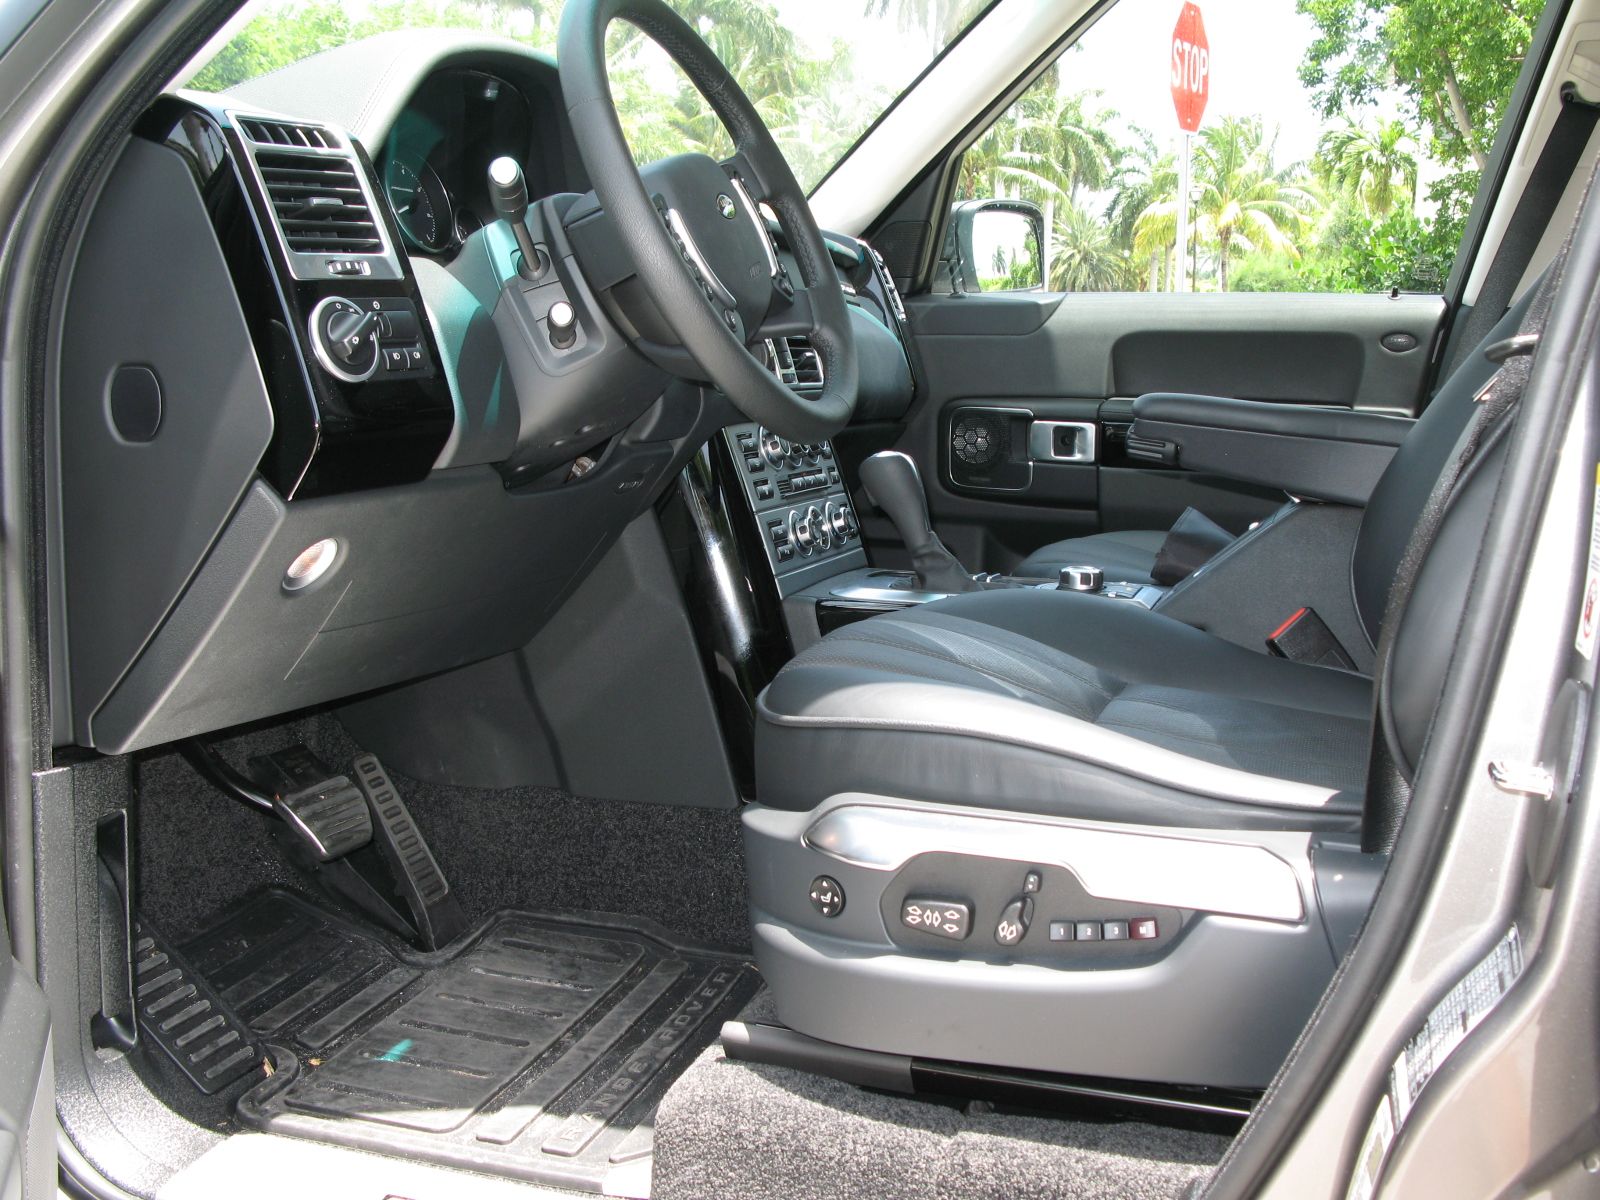 2008 Range Rover Supercharged